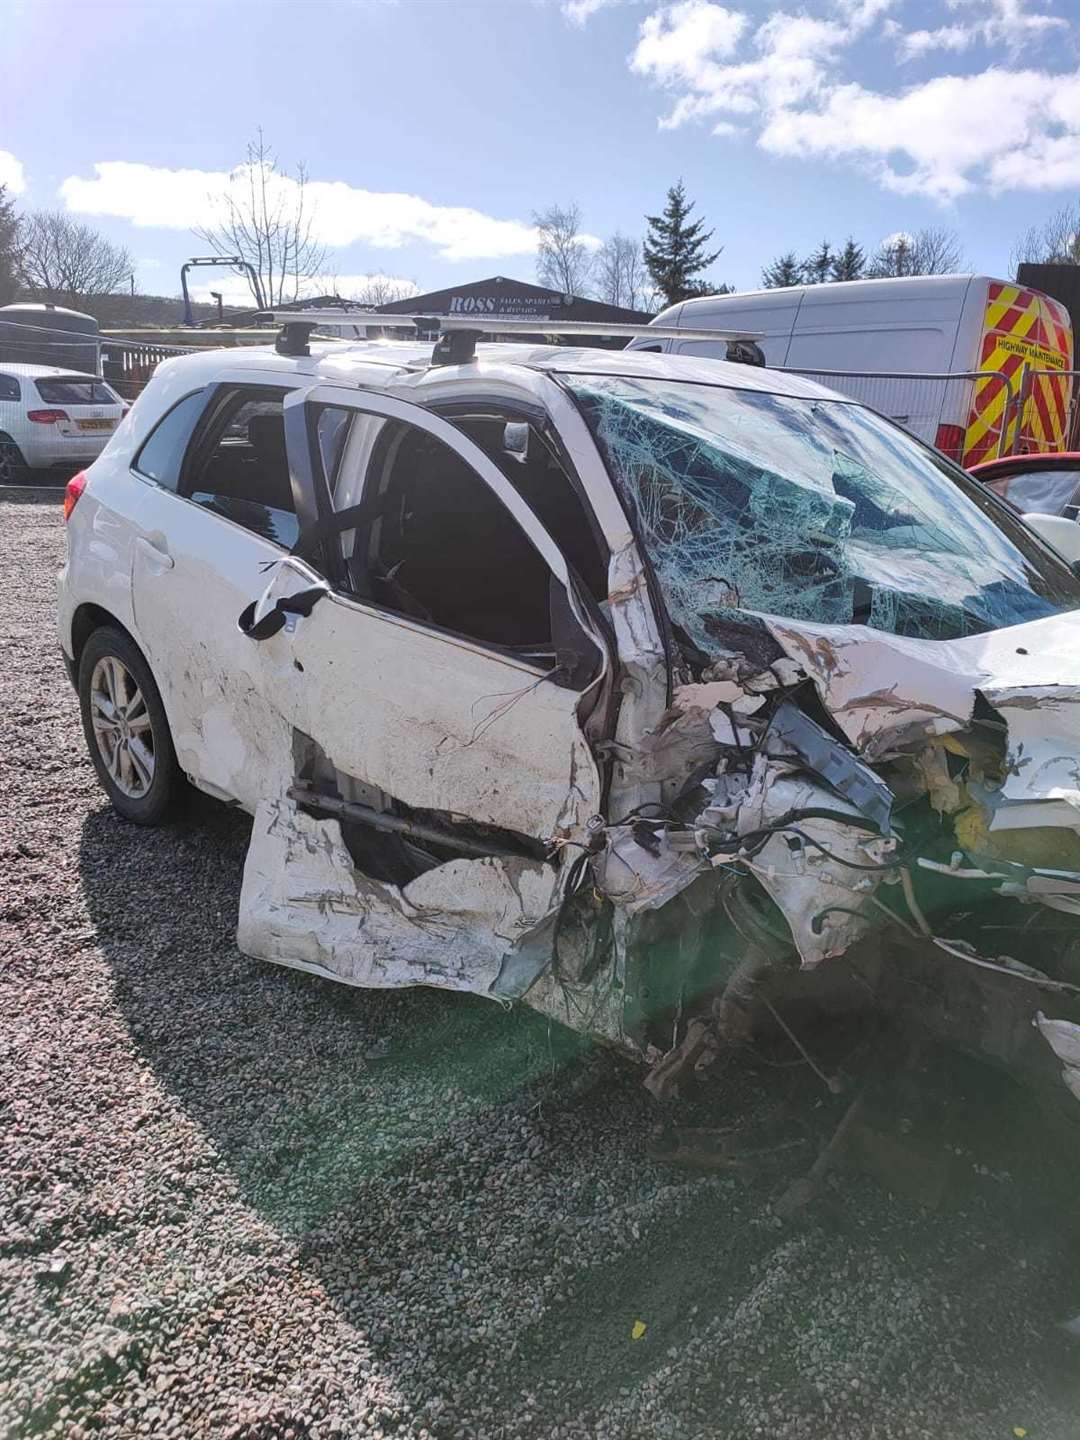 Mr Simpson's car was wrecked in the crash on March 24. Picture: Daniel Simpson.